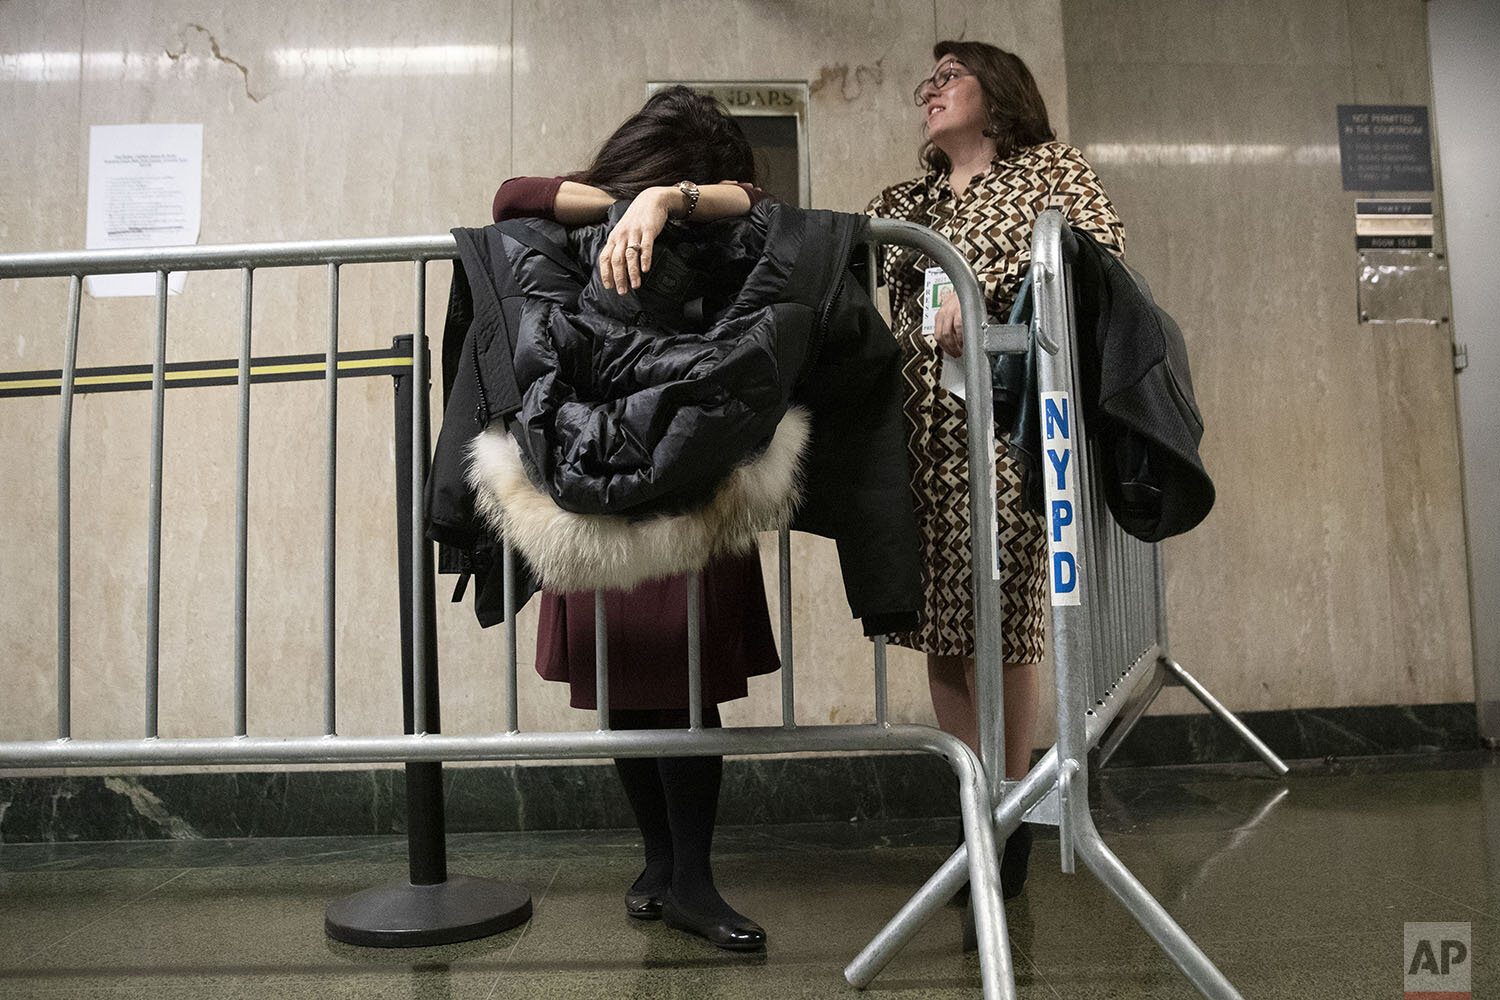  NBC News field producer Sumiko Moots, left, and wait in line to enter the courtroom during Harvey Weinstein’s rape trial, Wednesday, Feb. 19, 2020, in New York. (AP Photo/Mary Altaffer) 